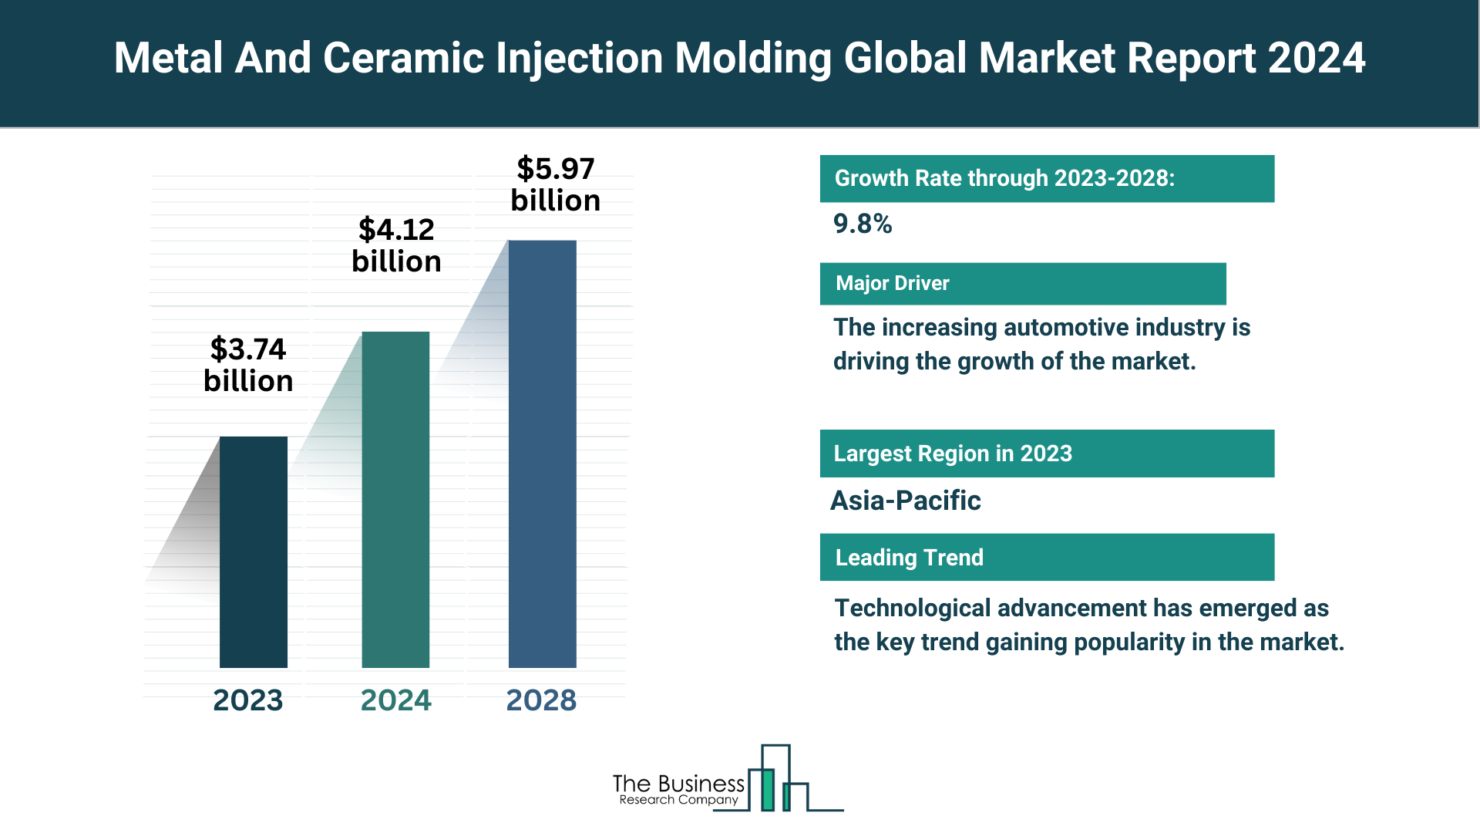 Global Metal And Ceramic Injection Molding Market